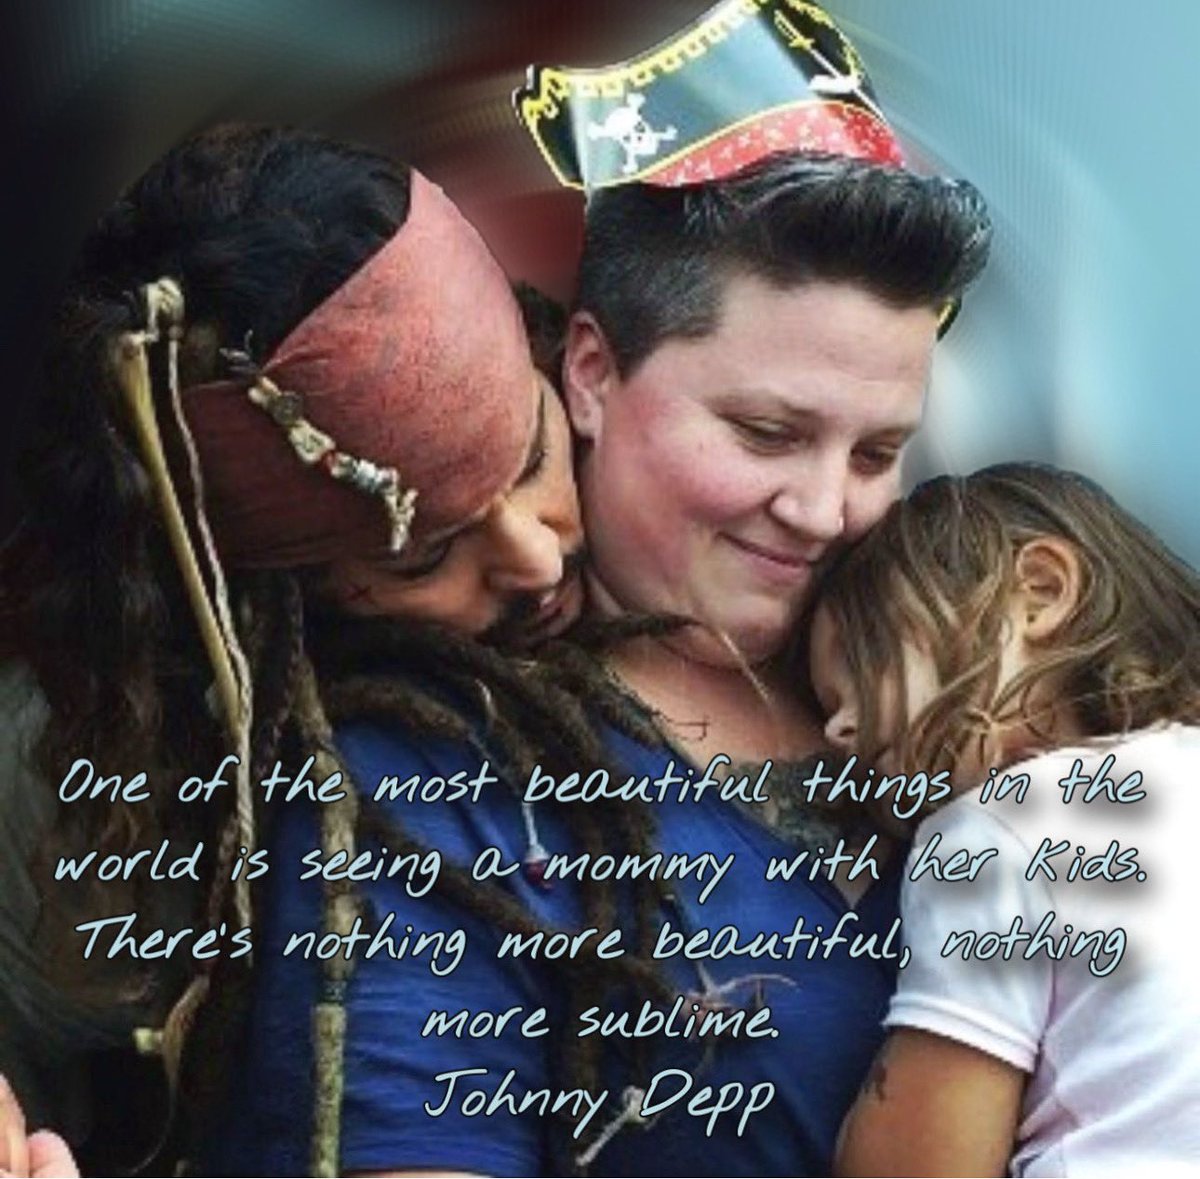 Happy Mother's Day to all wonderful mothers and grandmothers💐❤️ #JohnnyDepp #JohnnyDeppIsALegend #JohnnyDeppIsABeautifulSoul #JohnnyDeppIsLoved #JohnnyDeppKeepsWinning #JohnnyDeppBestActor #IStandWithJohnnyDepp #HappyMothersDay